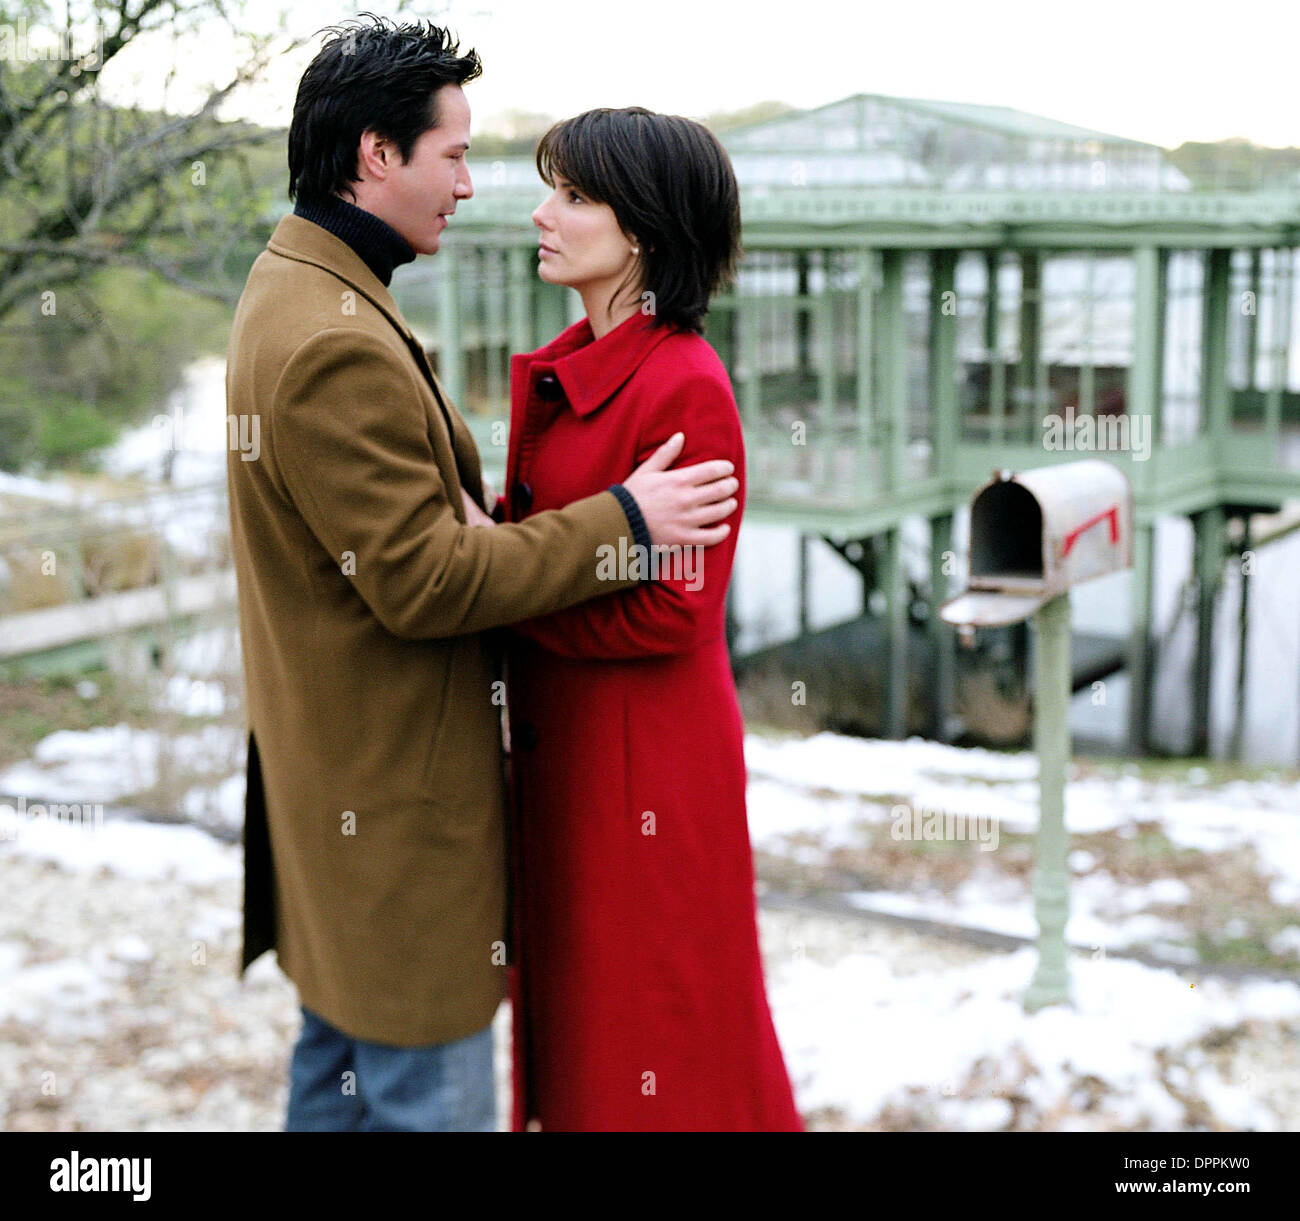 May 22, 2006 - KEANU REEVES stars as Alex Wyler and SANDRA BULLOCK stars as  Kate Forster in Warner Bros. Pictures' and Village Roadshow Pictures'  romantic drama ''The Lake House.''. .K49221ES.TV-FILM STILL.